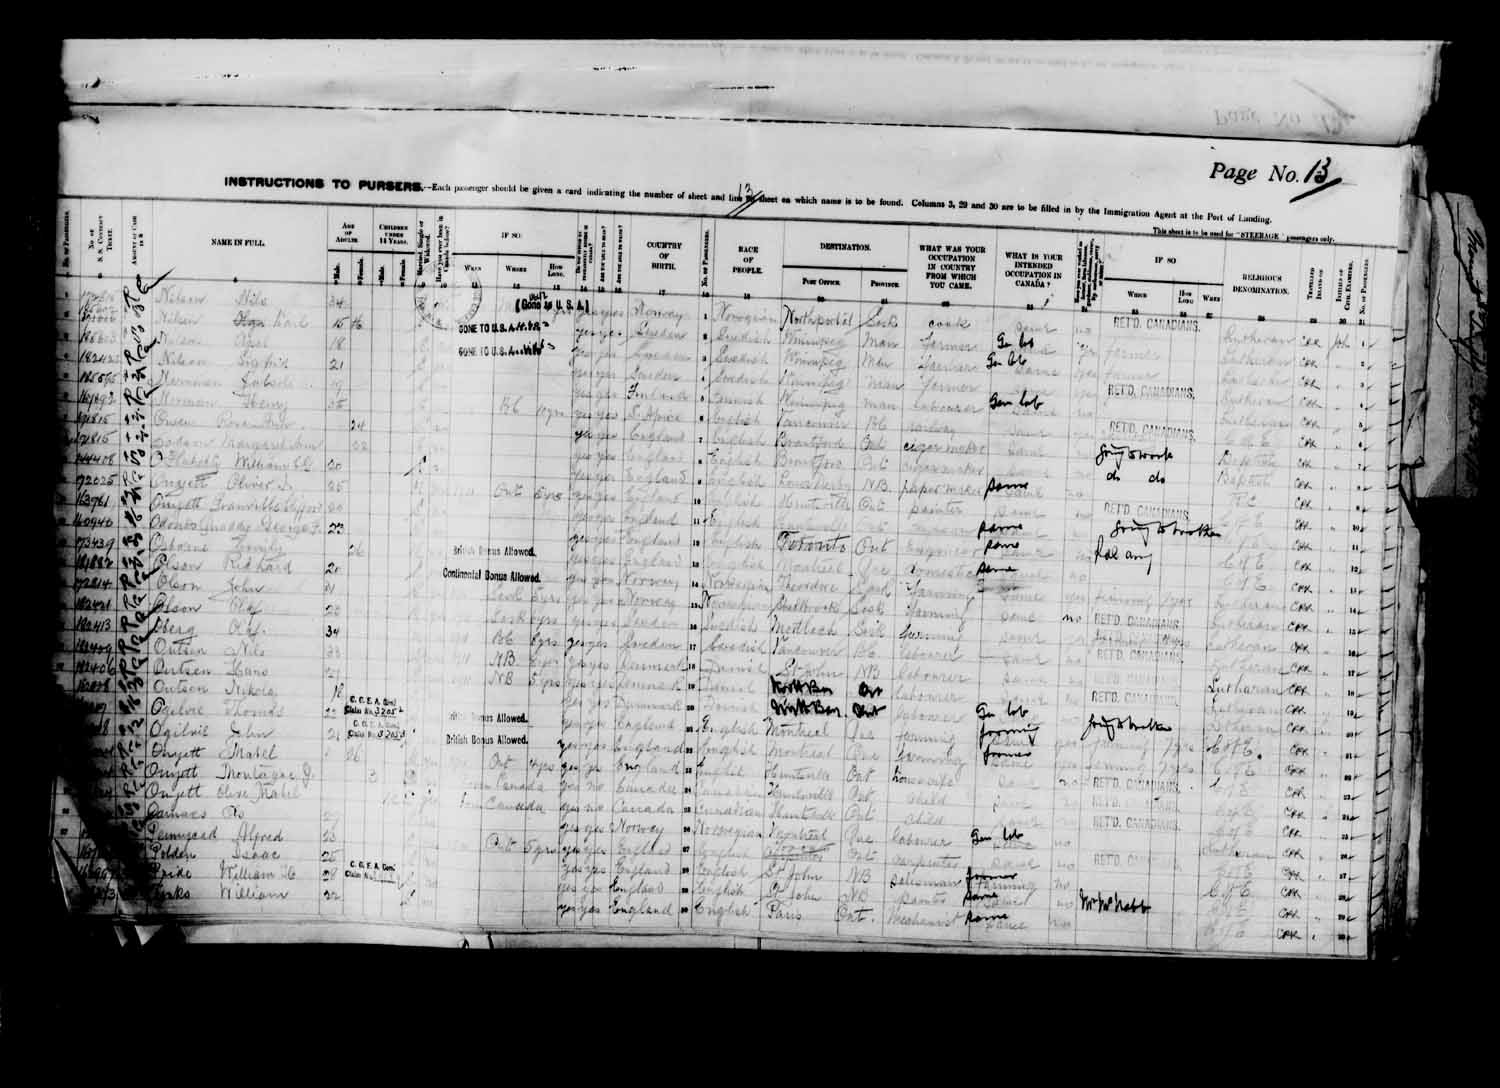 Digitized page of Passenger Lists for Image No.: e003627202